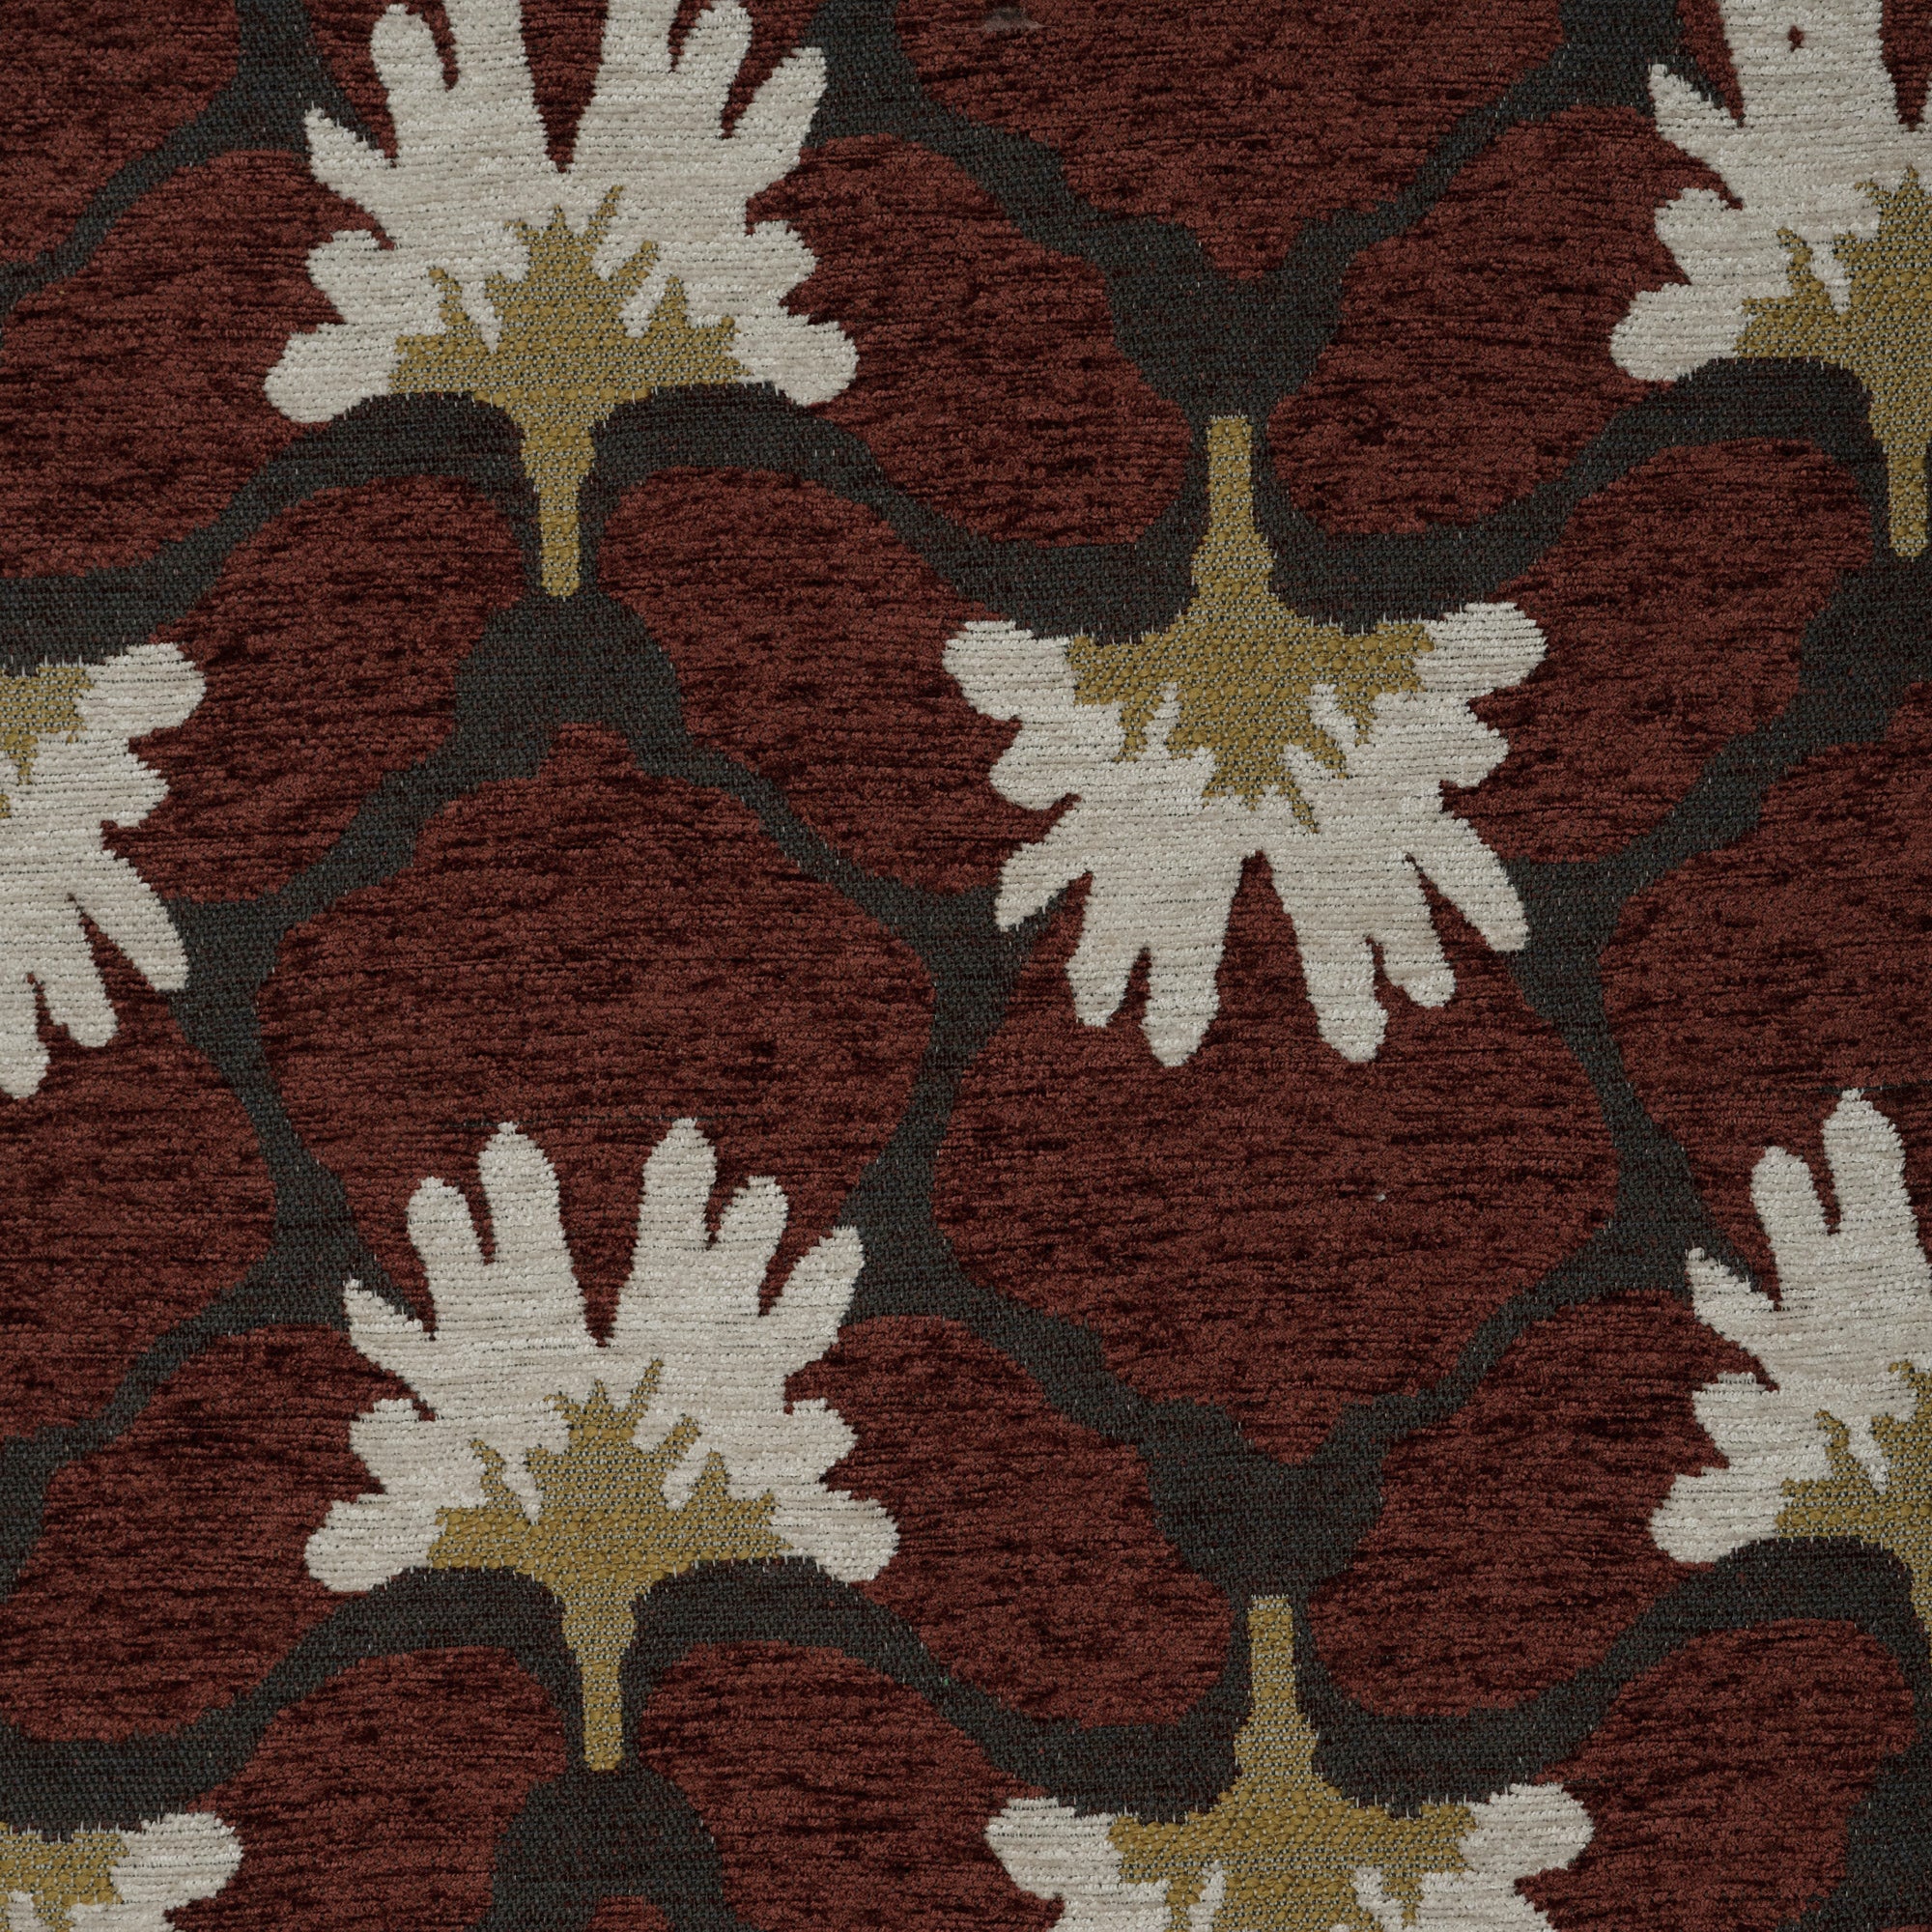 LV706-HB1C On A Fall Day - Scallop Flower - Harvest Brown Canvas Fabric